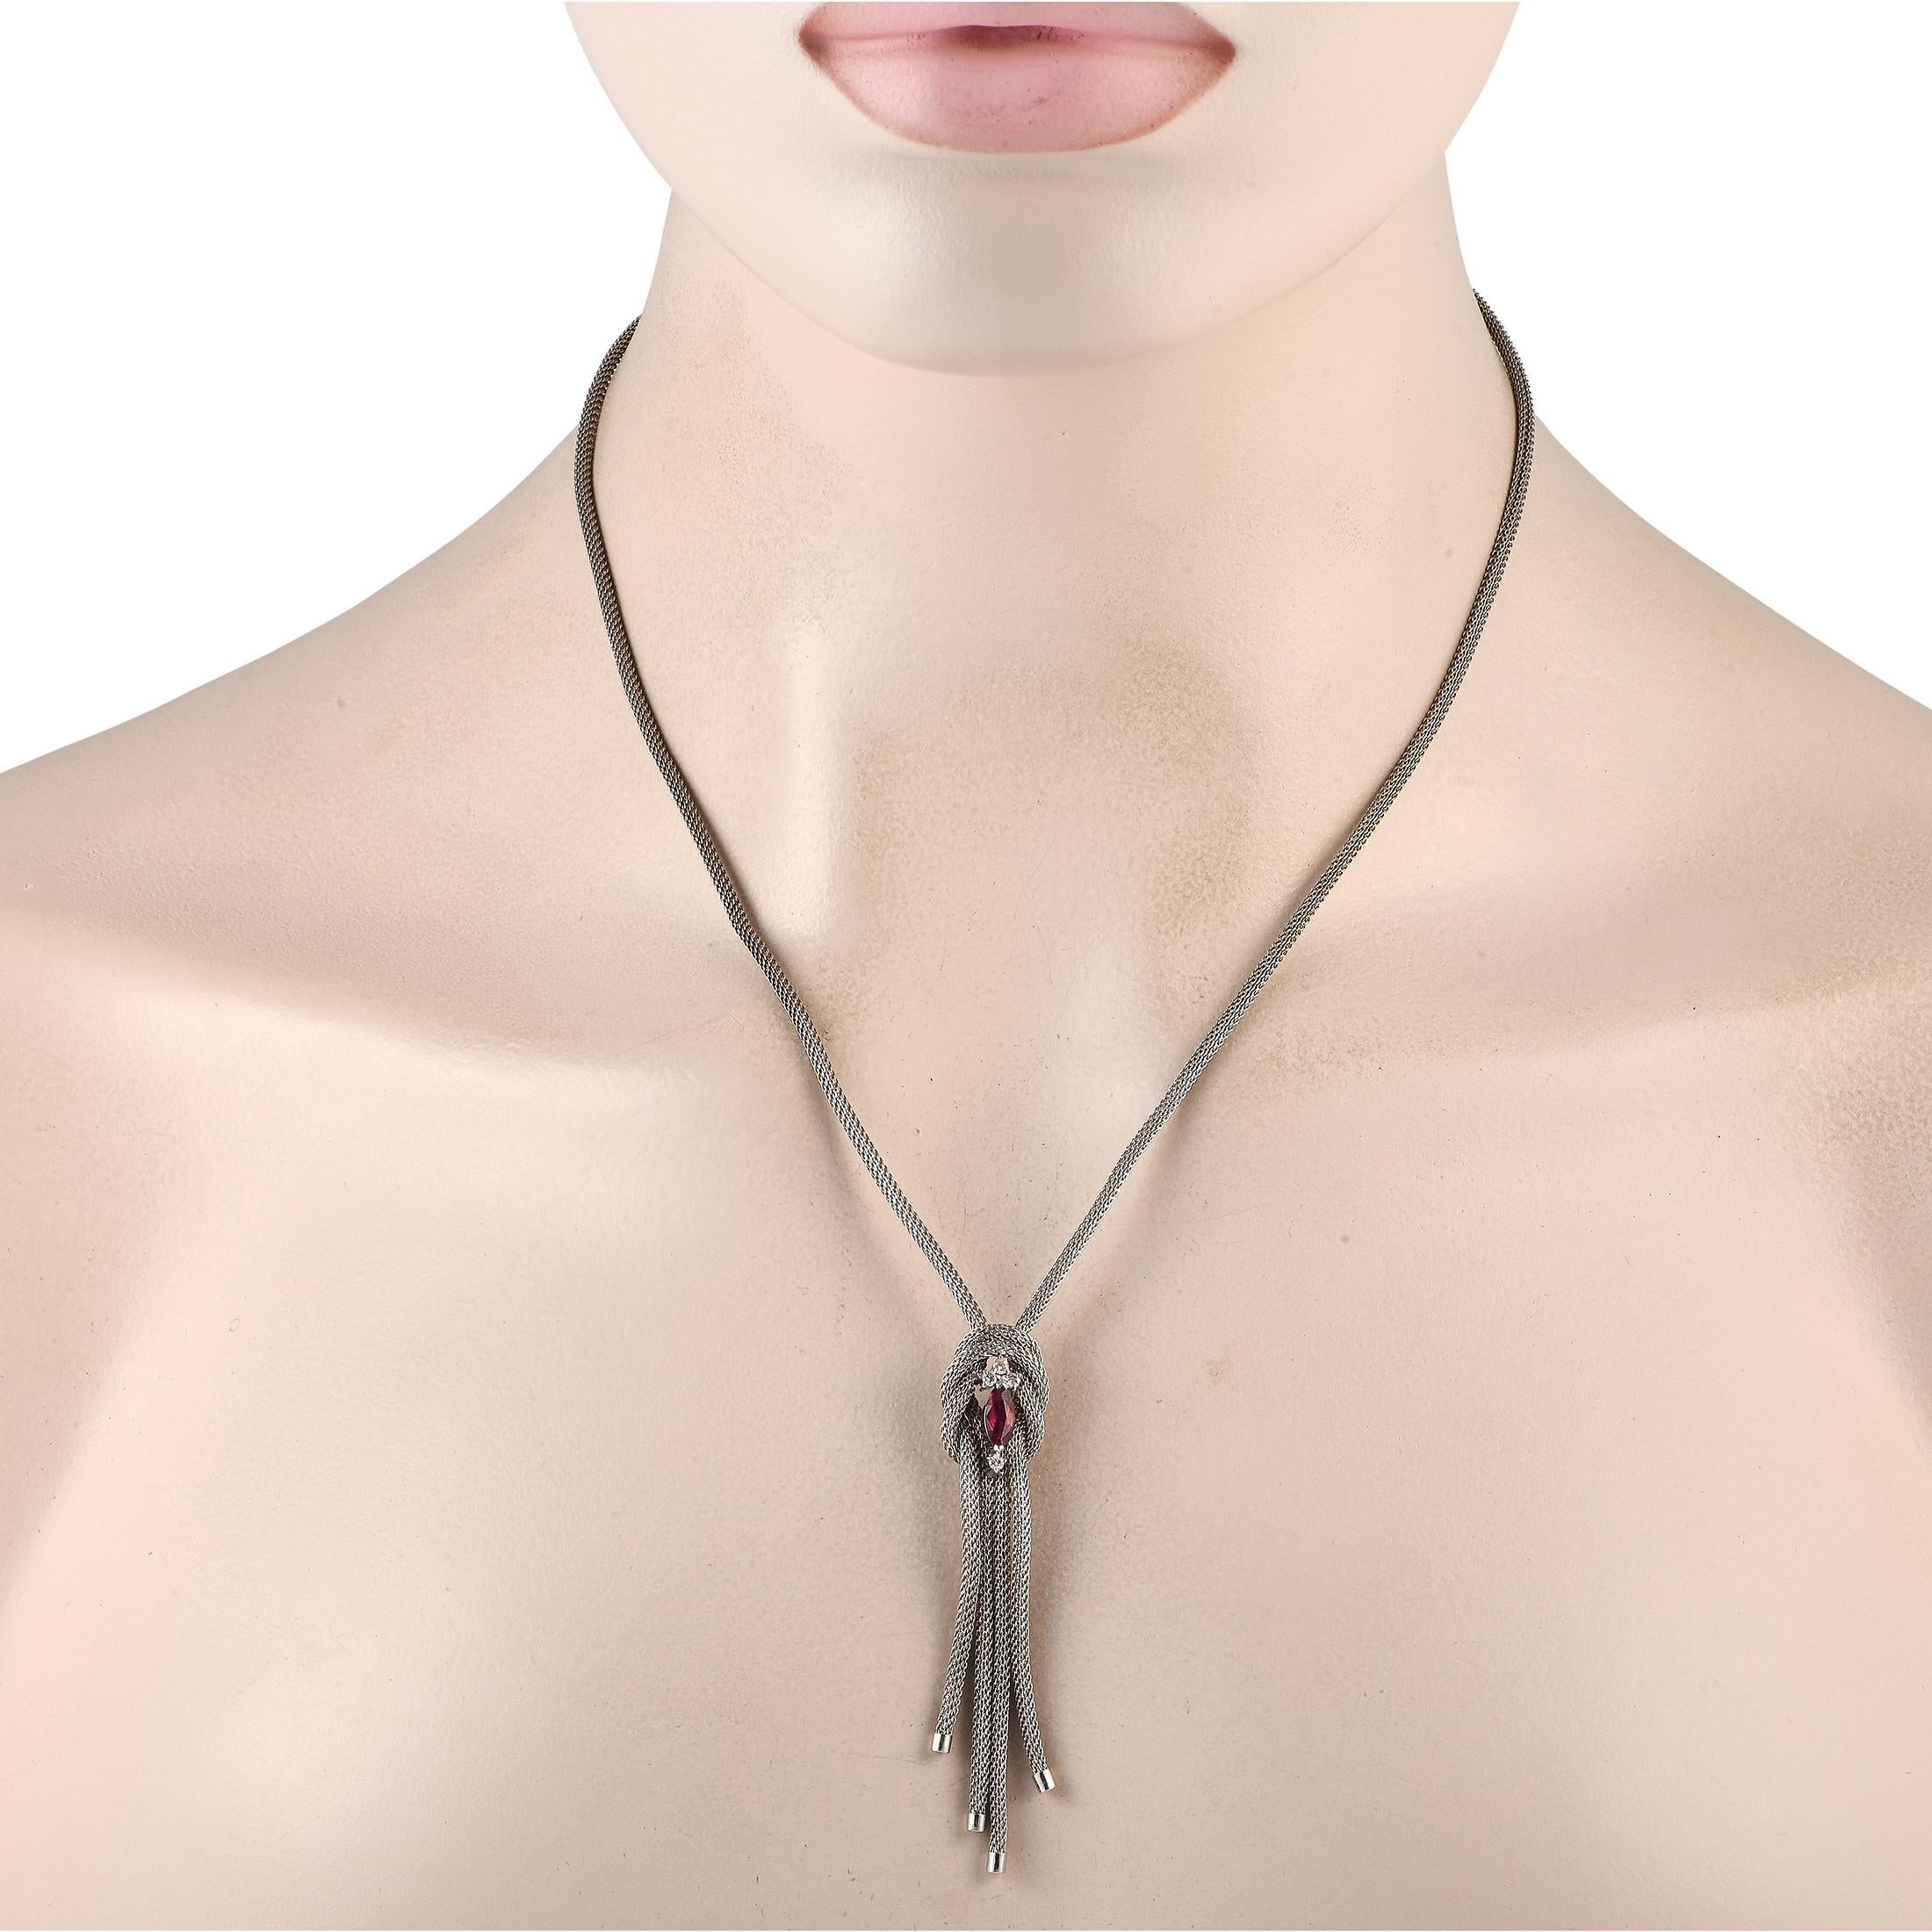 Effortlessly sport a chic style with this LB Exclusive lariat-style necklace. It features a 24-inch popcorn chain necklace secured by a spring ring clasp. Hanging at the center like a pendant is a 2.5-inch tassel drop with multiple popcorn chains, a